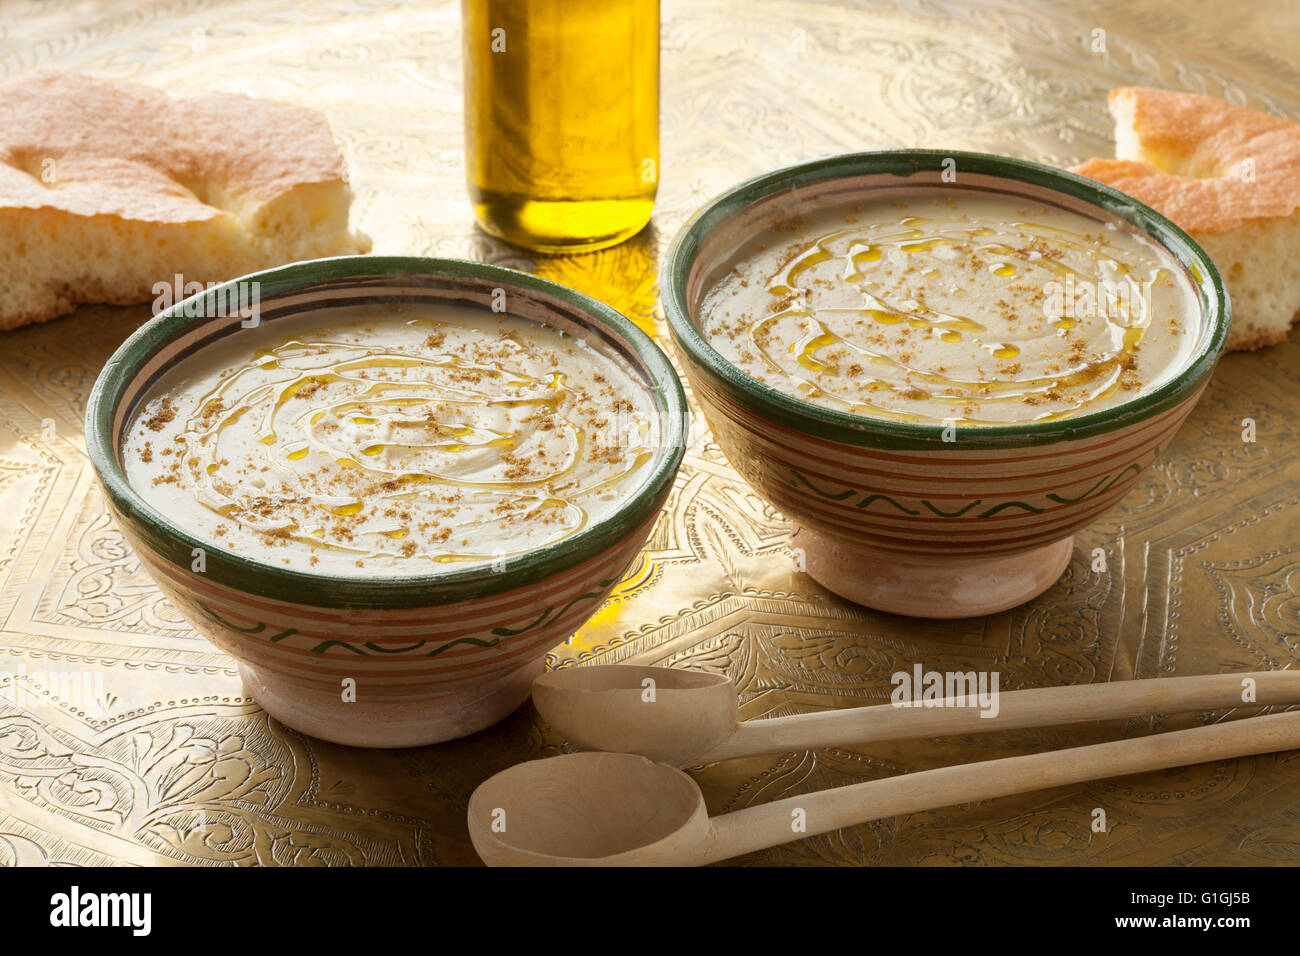 Bowls with Moroccan bessara soup, olive oil and cumin Stock Photo